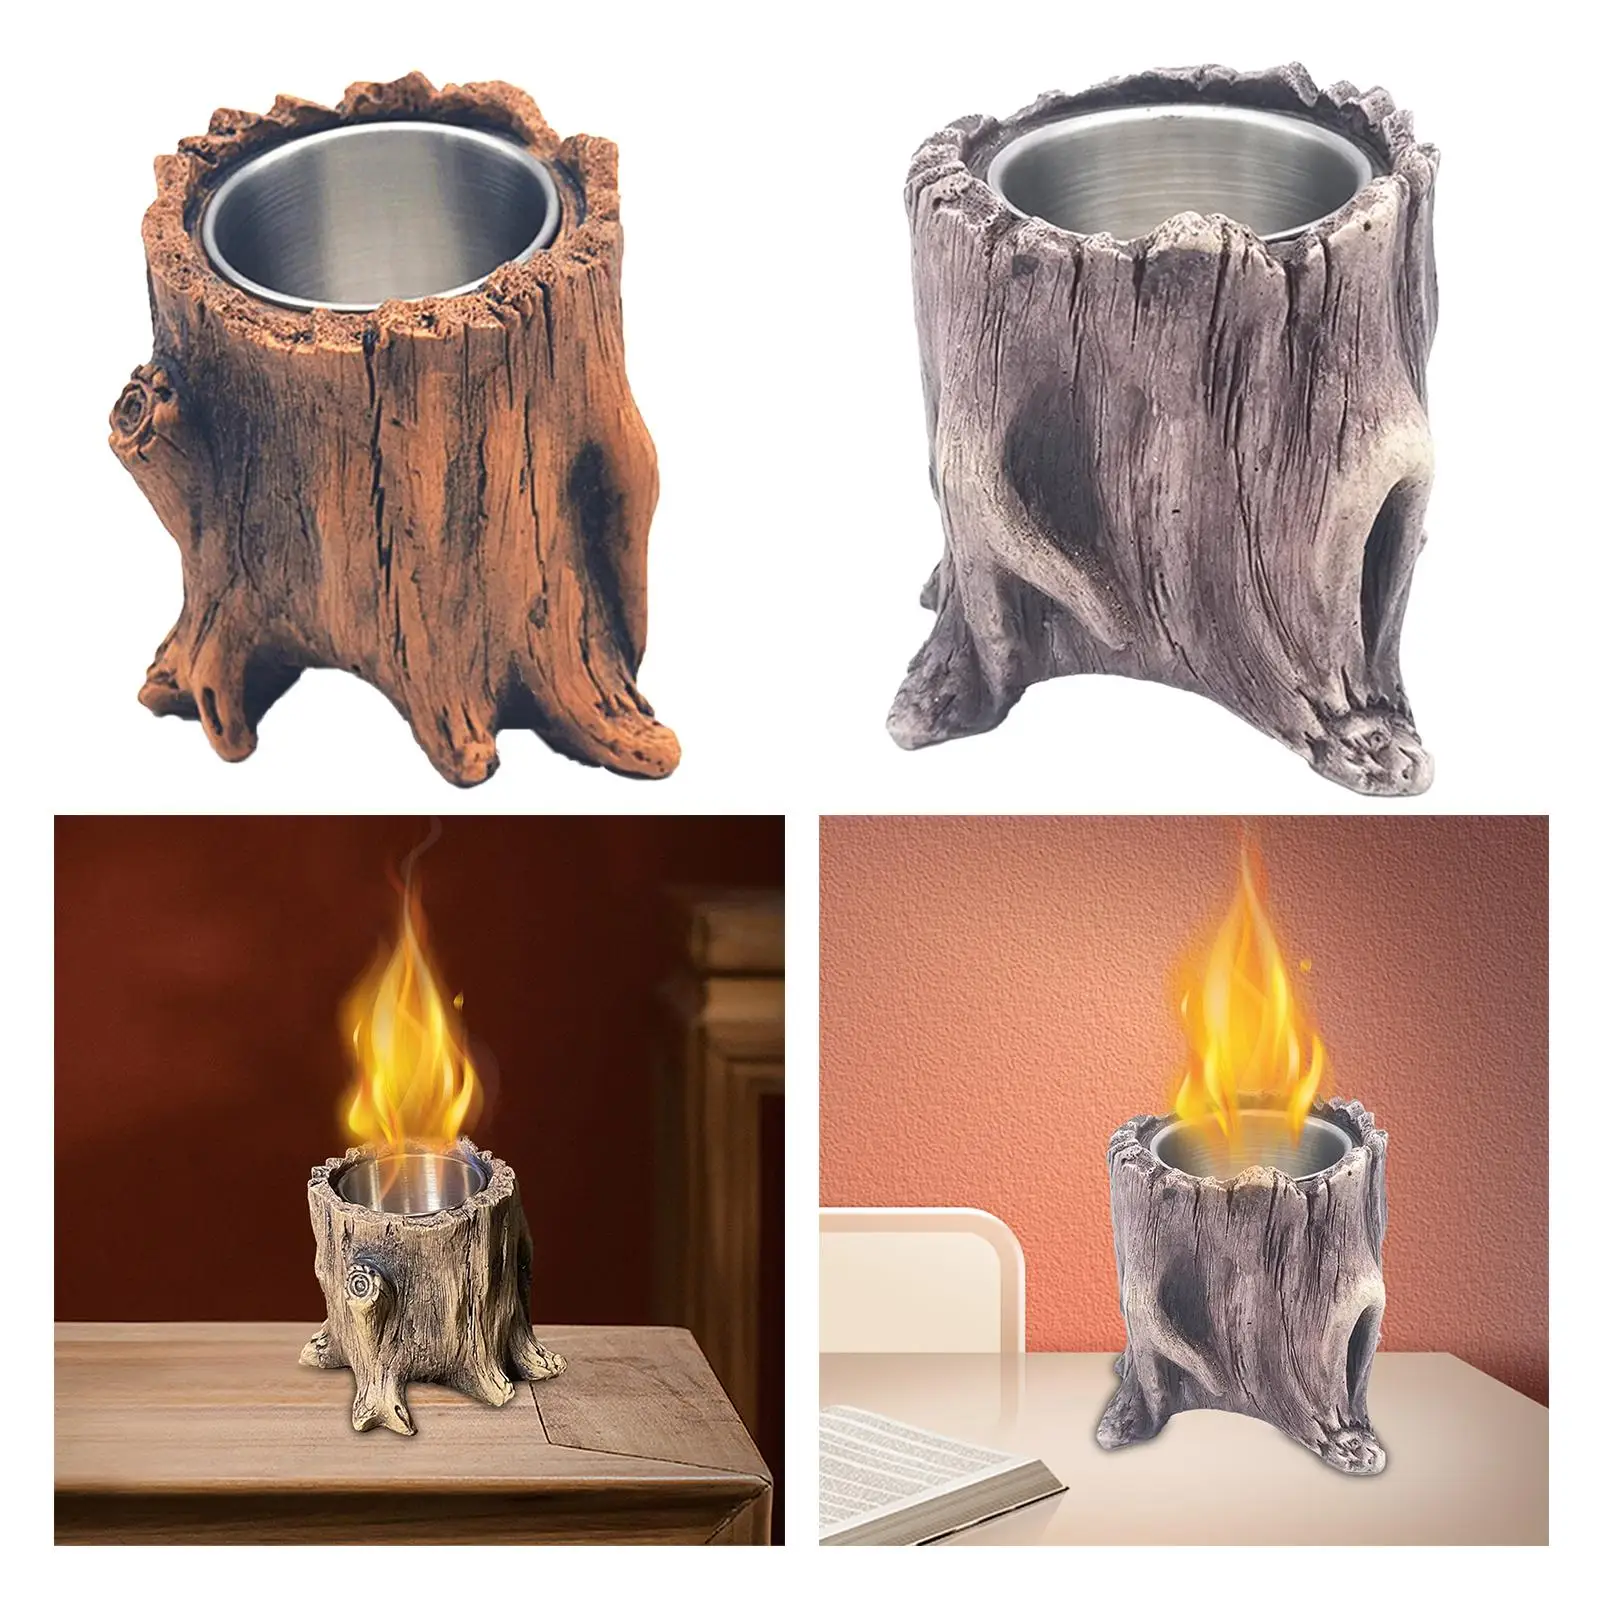 Tabletop Fireplace Tree Stump Durable Conch Long Burning Alcohol Fireplace for Camping Gardens Living Room Balconies Ornament